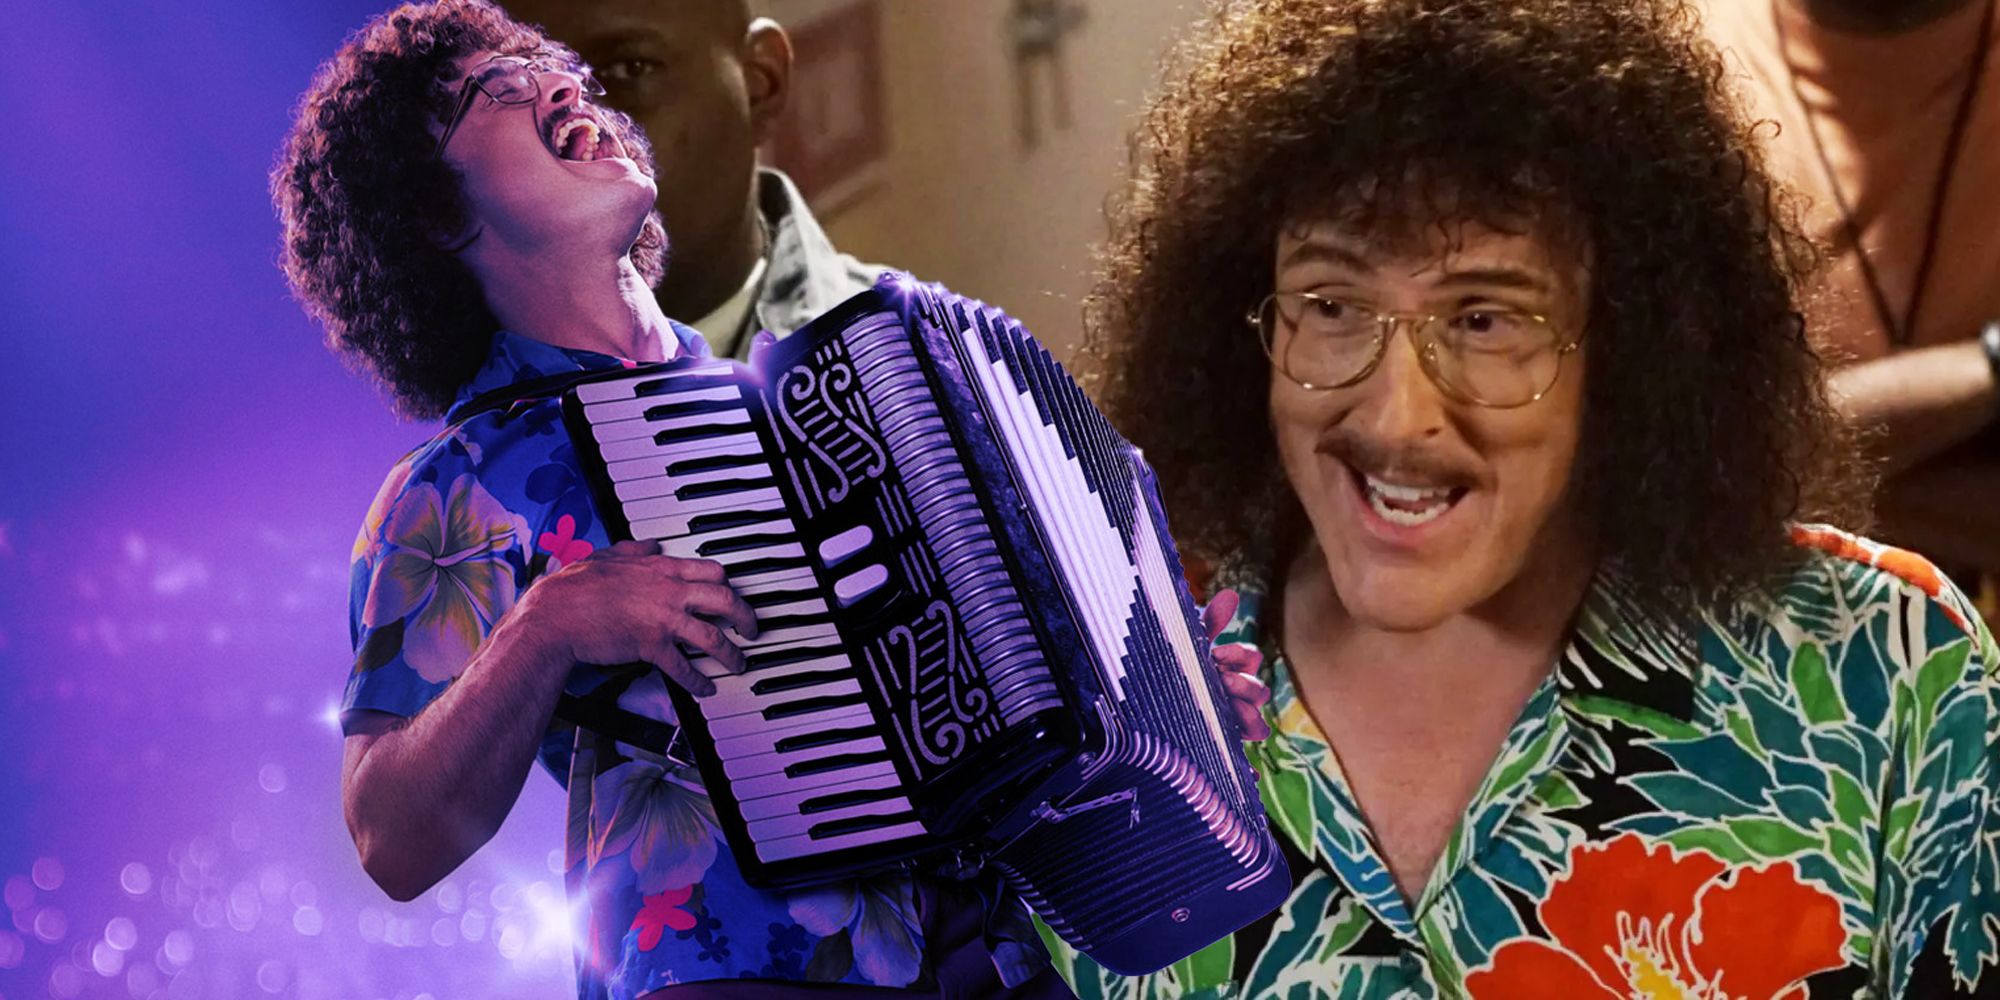 Daniel Radcliffe and the real Weird Al